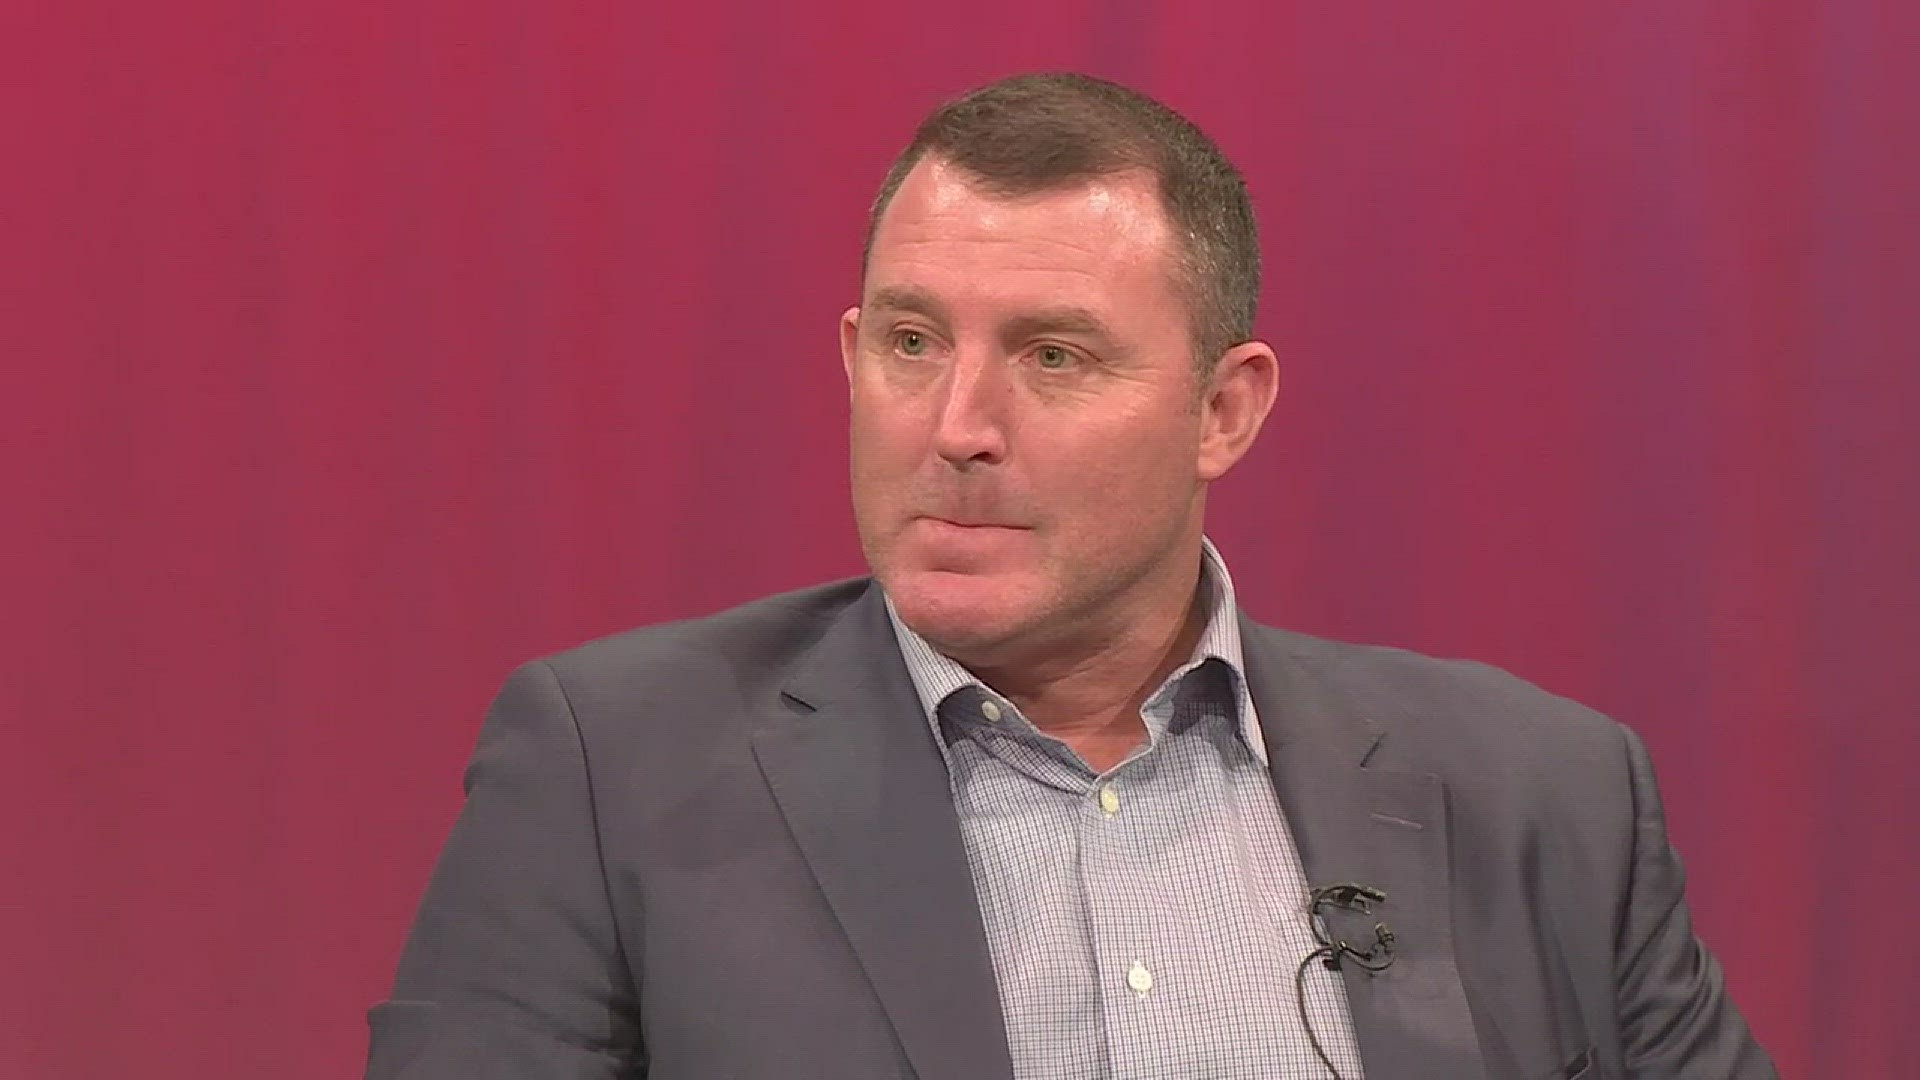 Jim Thome on how the current Cleveland Indians compare to the late 1990s teams